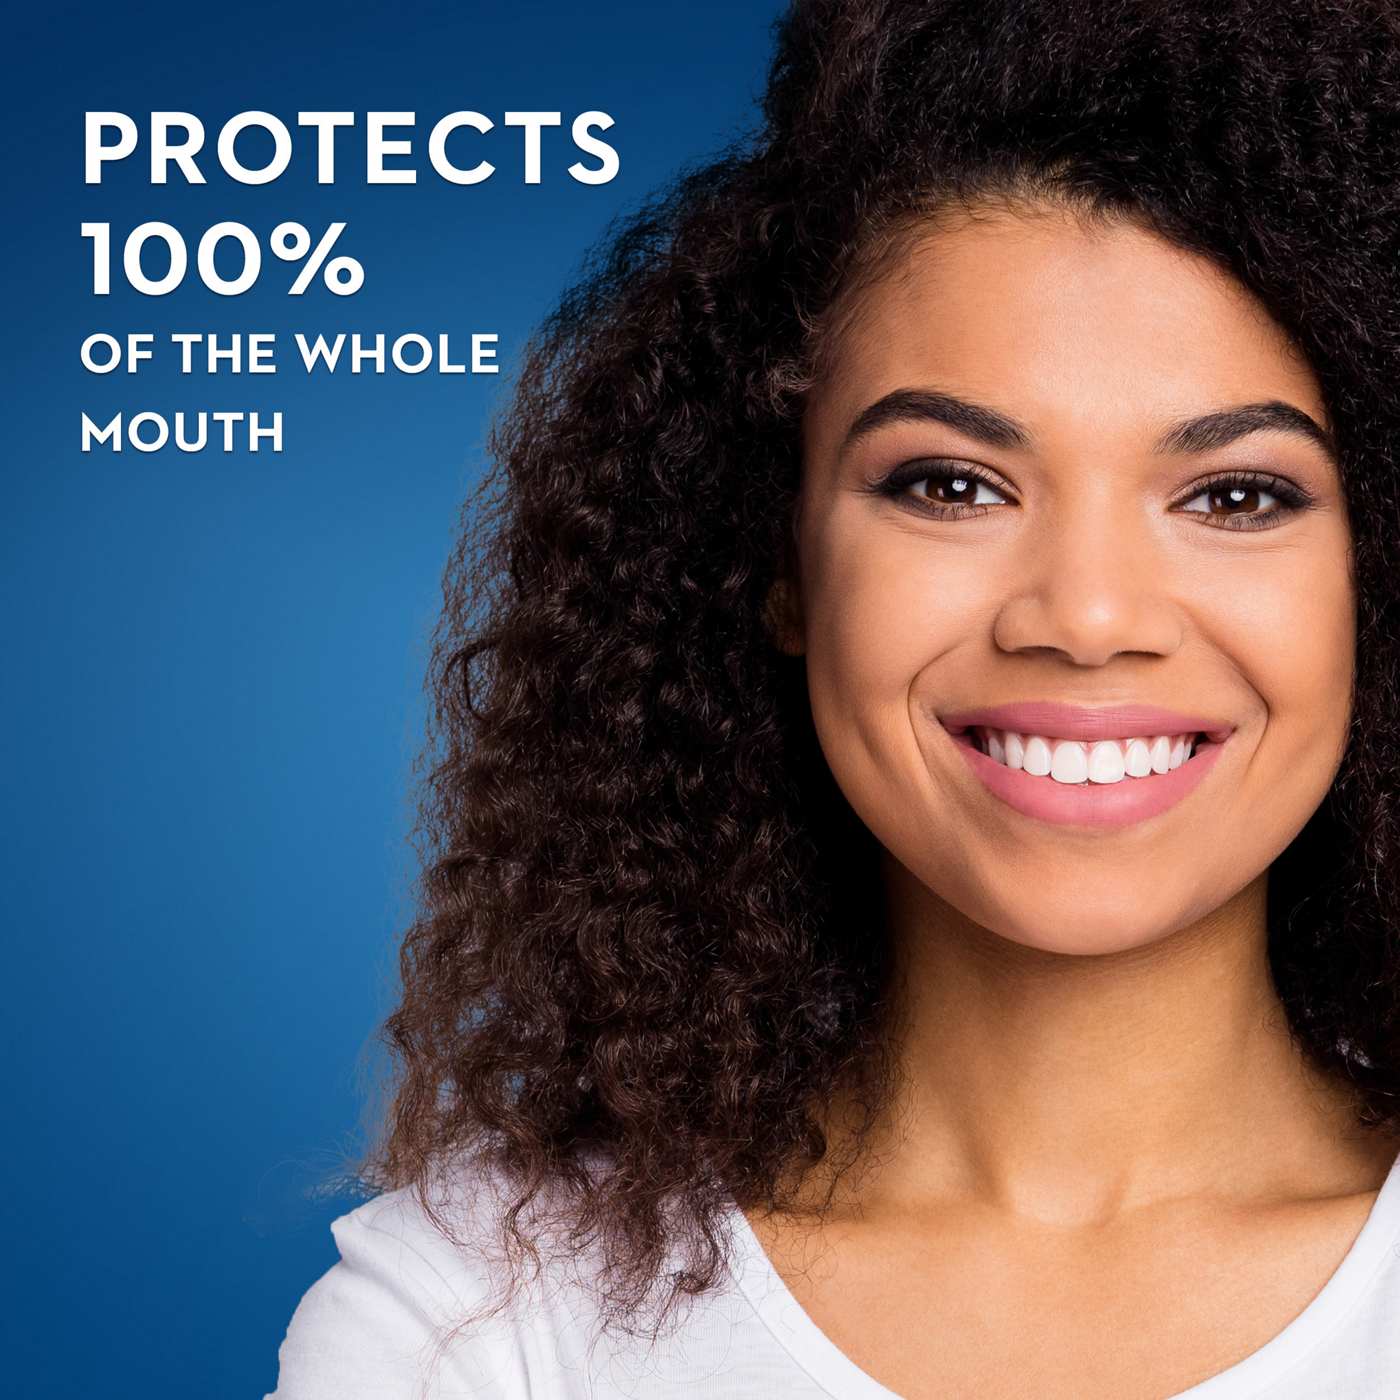 Crest Pro-Health with a Touch of Scope Gel Toothpaste; image 5 of 10